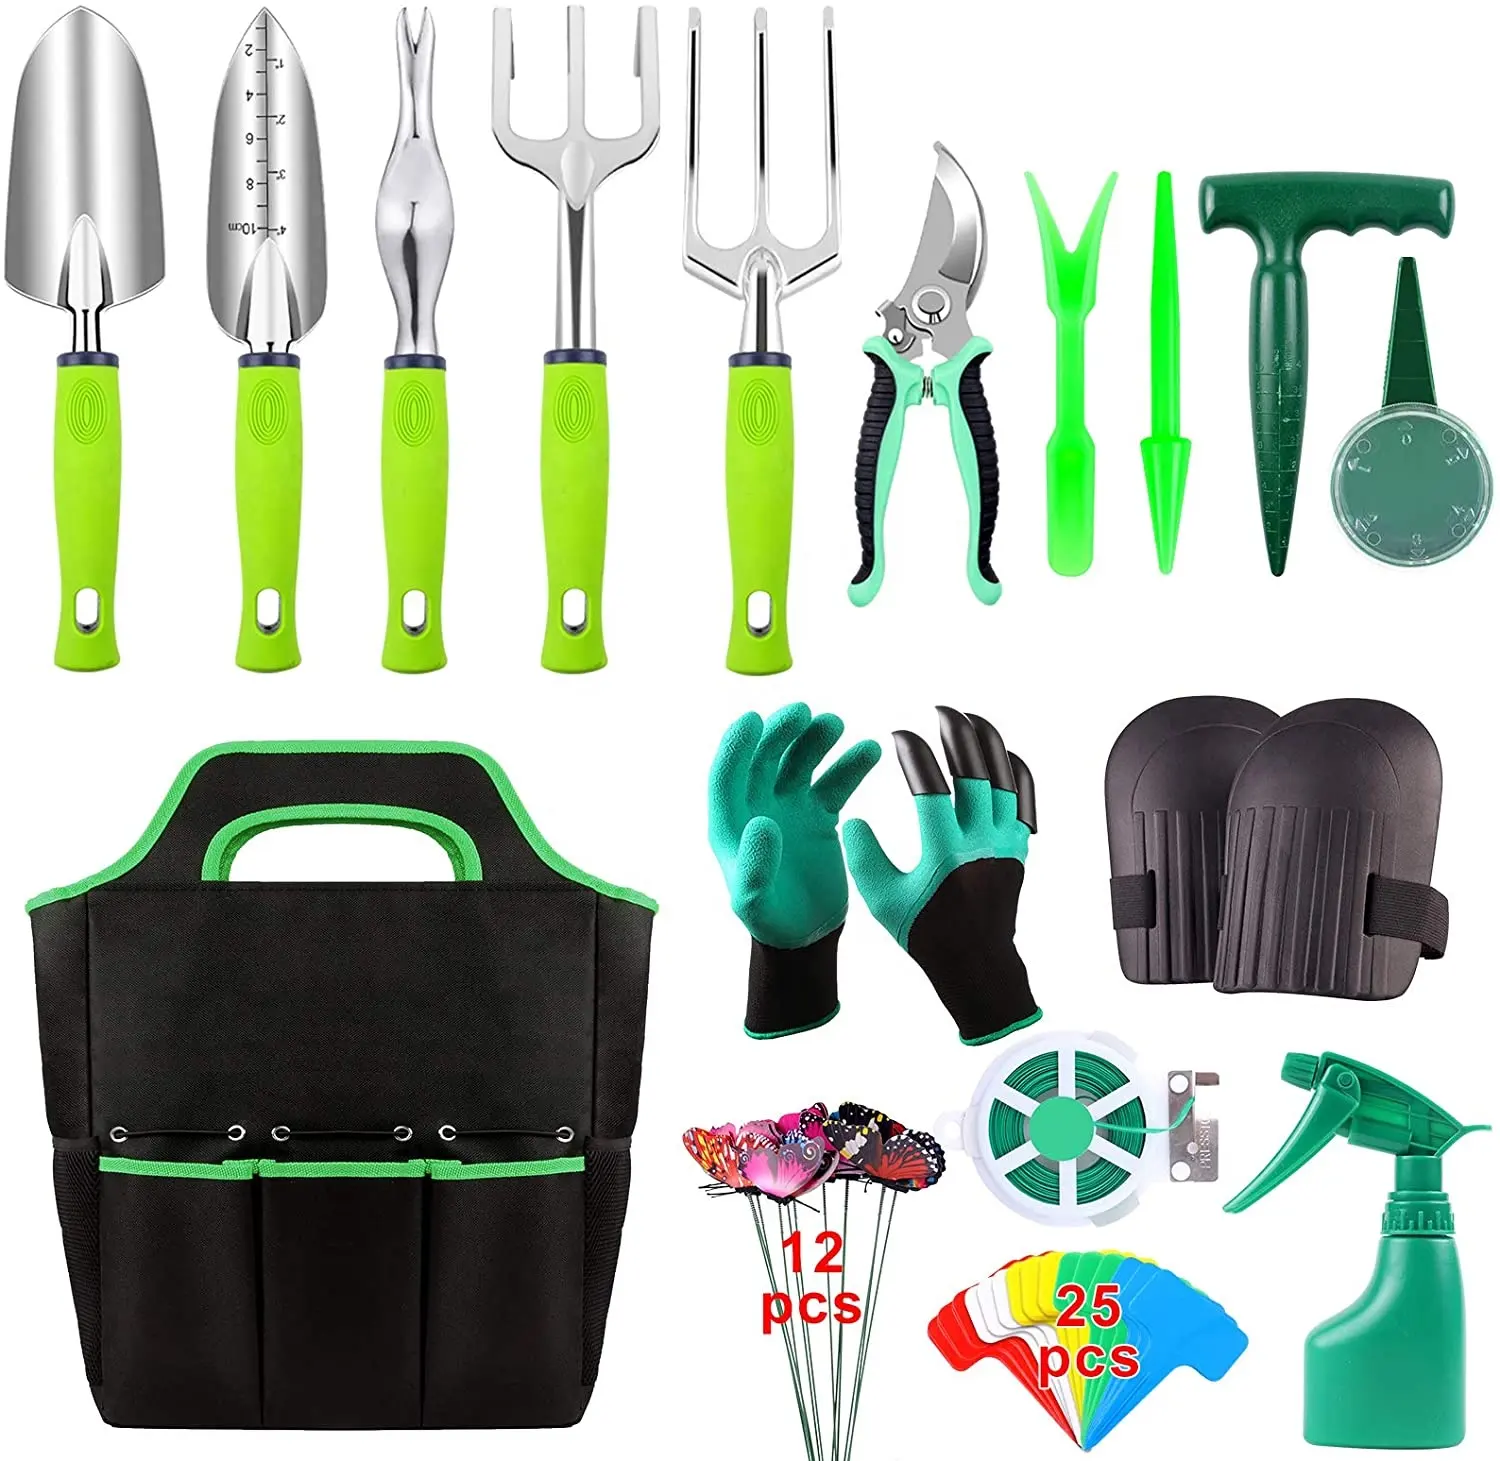 Wejump Heavy Duty Gardening Tools with Non-slip Rubber Handle, Durable Storage Tote Bag, Pruning Shears Garden Tools Kits